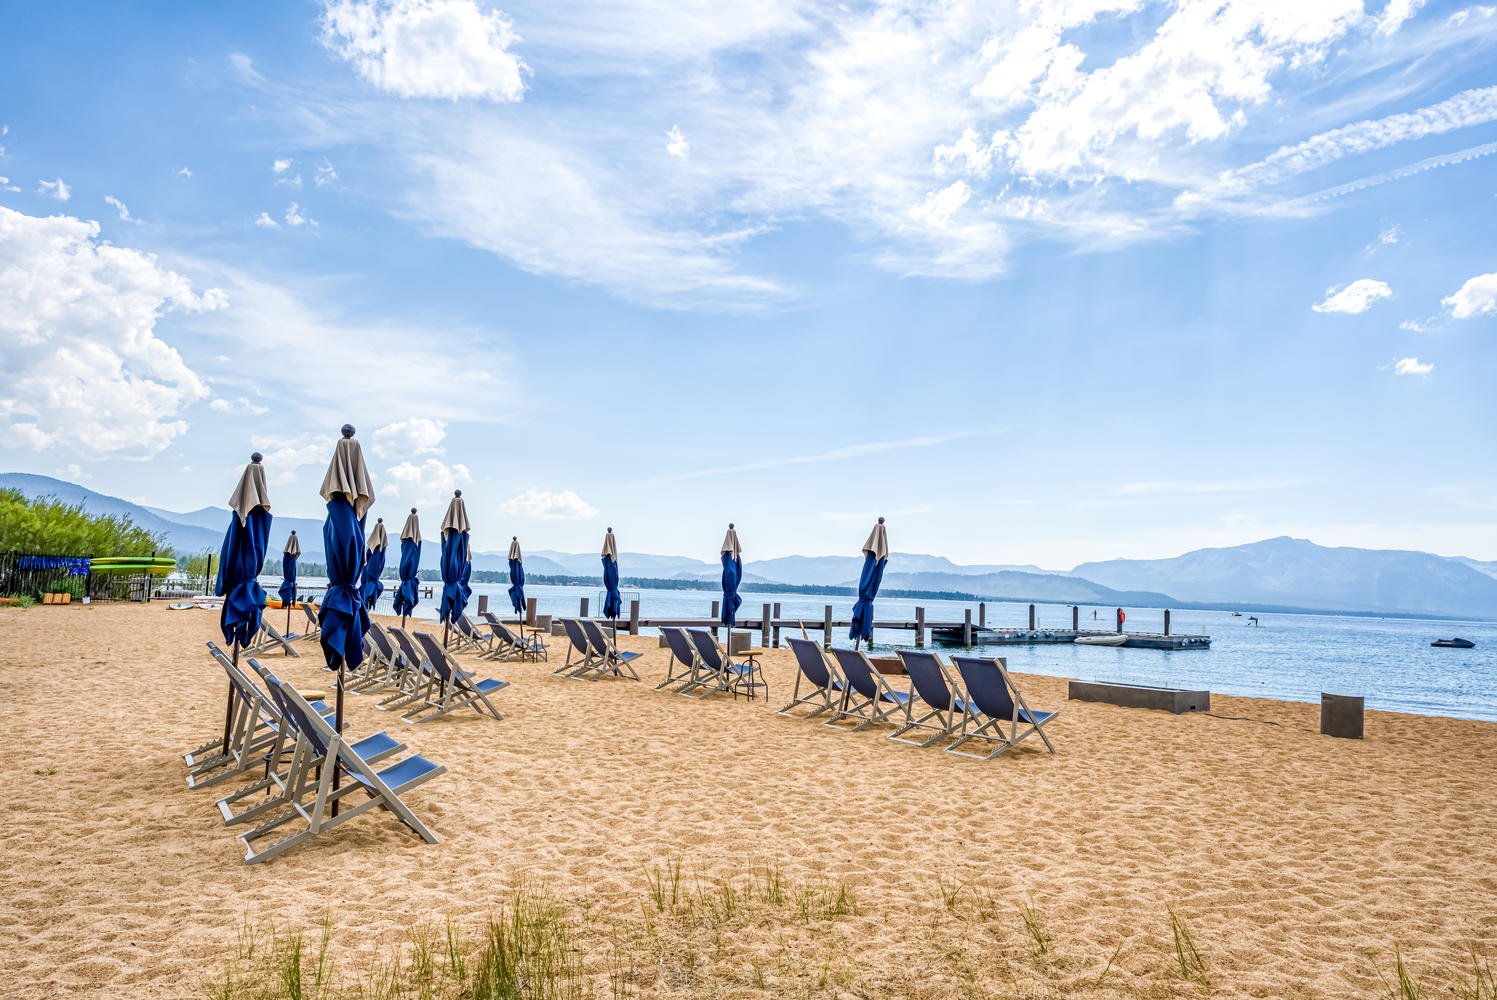 Tahoe Beach Club's private beach, where rows of beach chairs and vibrant umbrellas dot the sandy landscape. (Copy) (Copy)